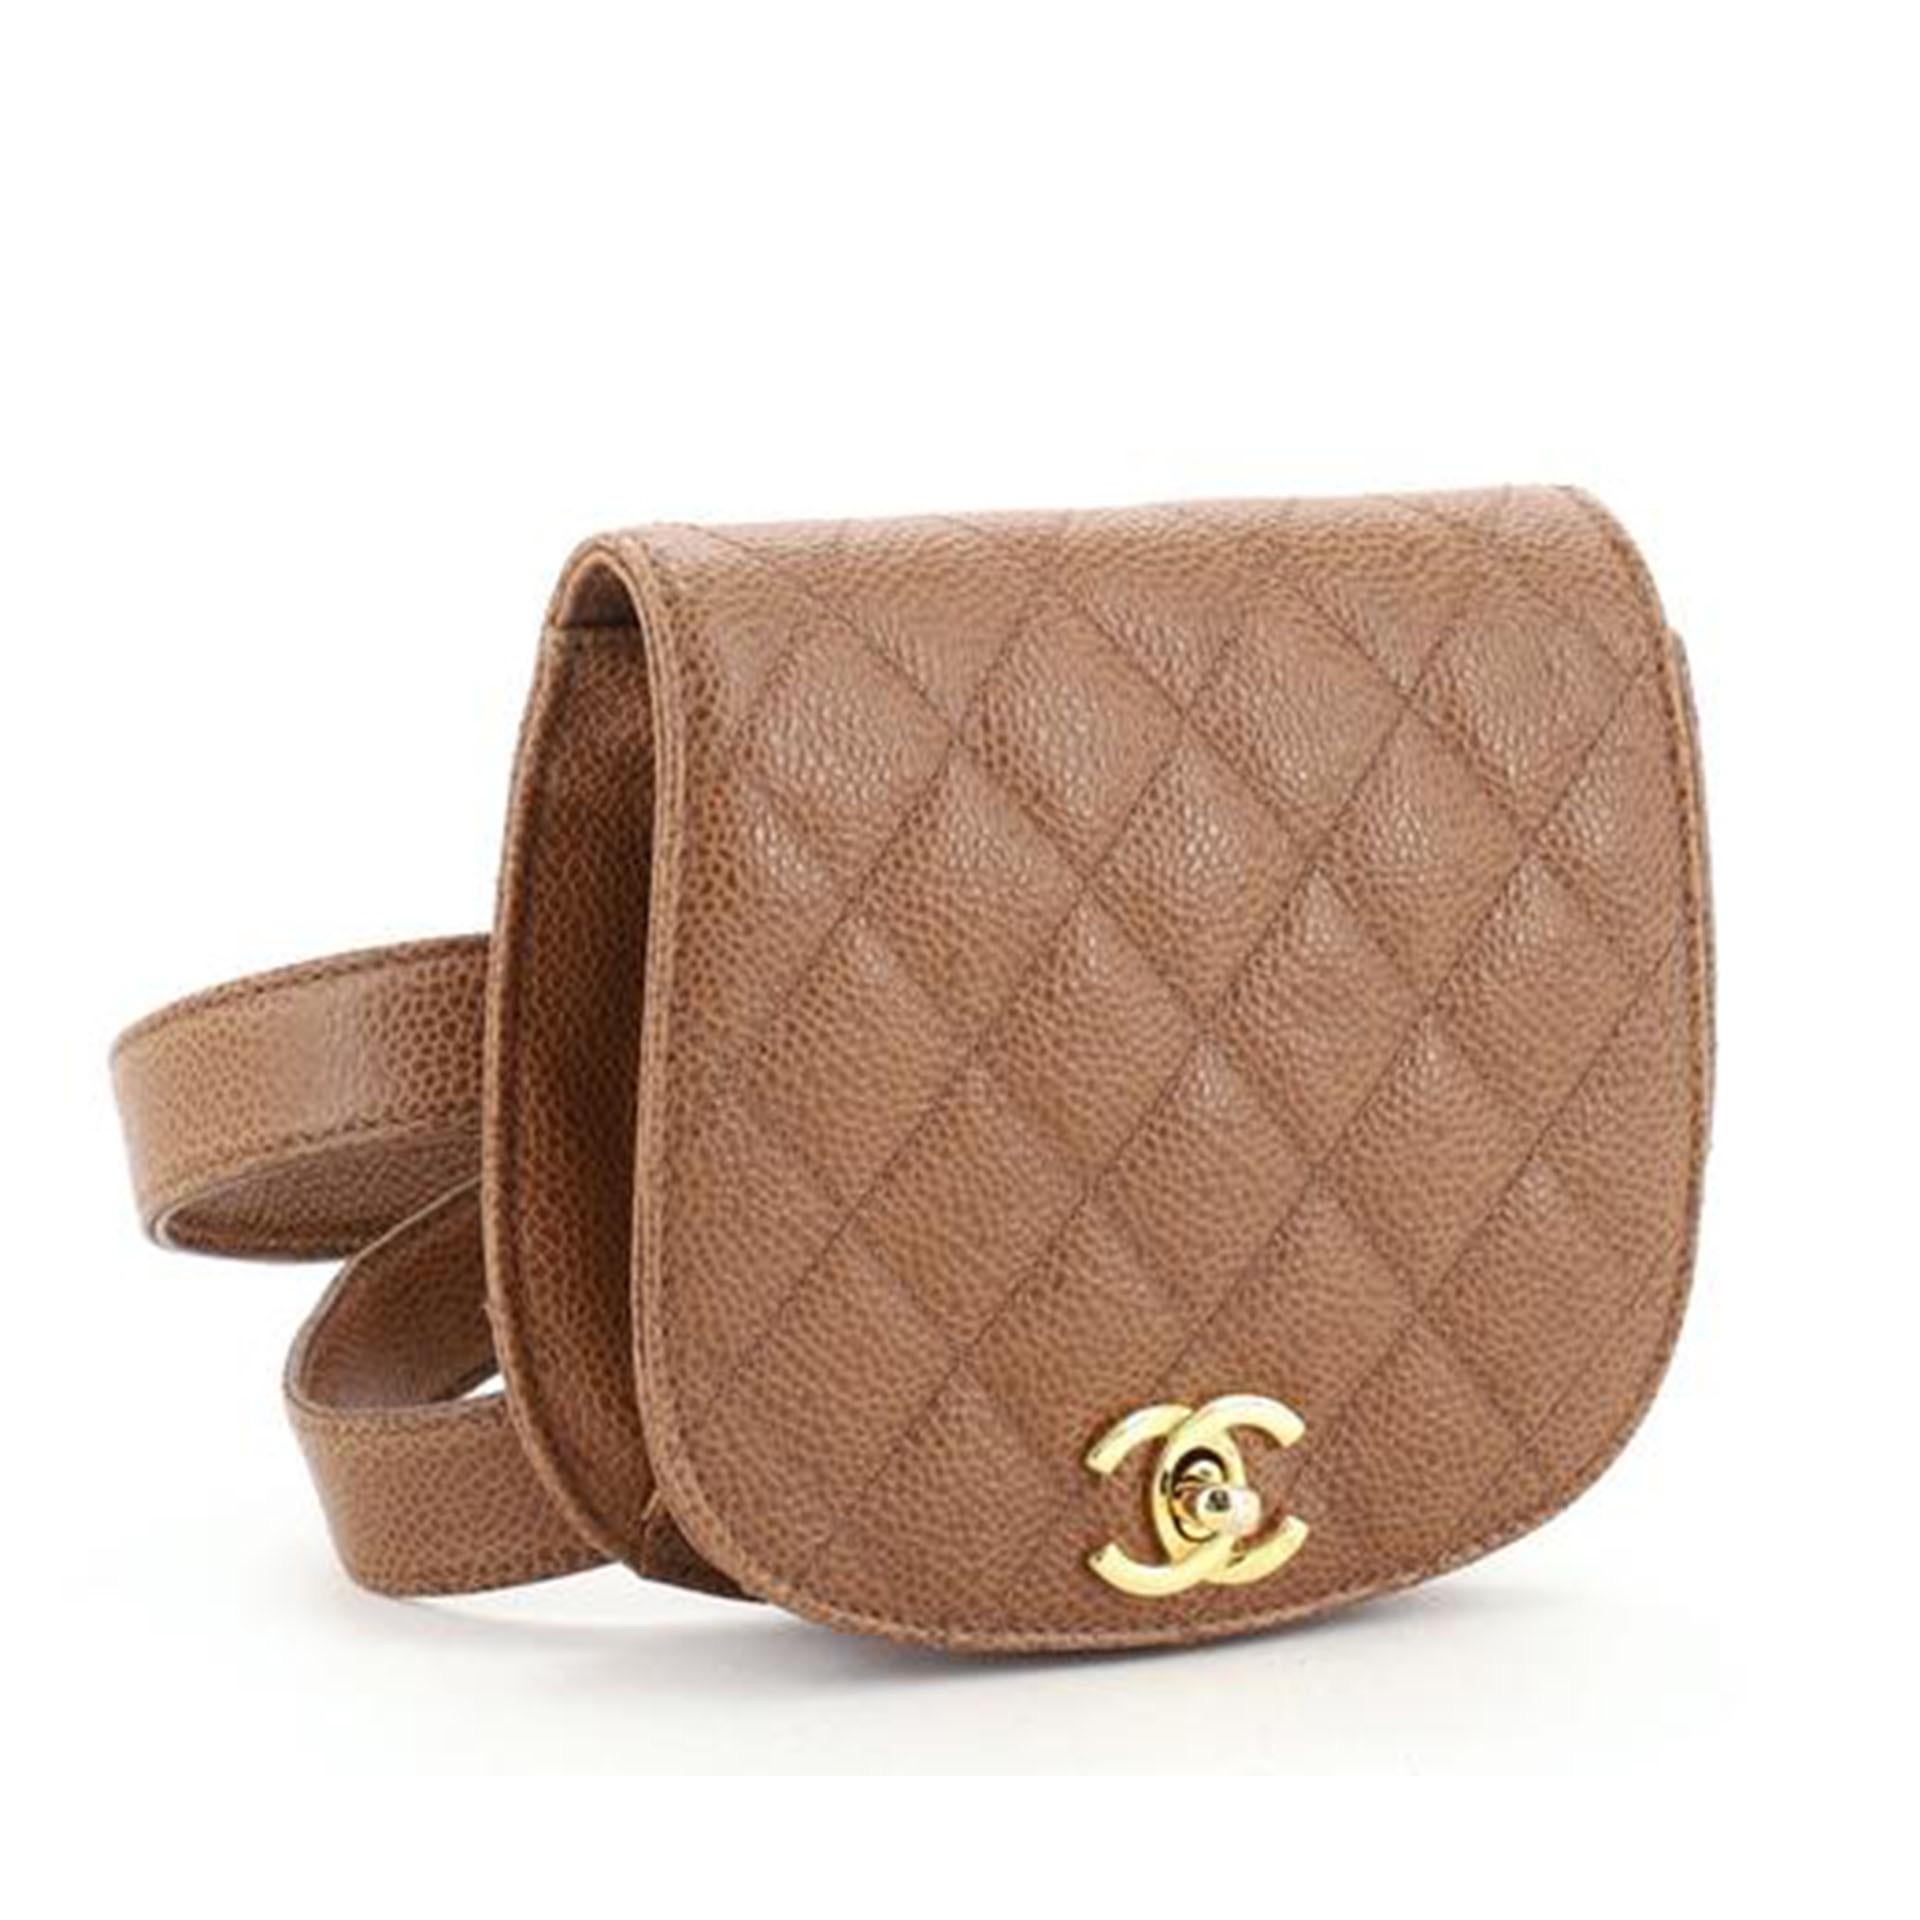 Chanel Vintage Beige CC Flap Waist Bag Quilted Caviar Small Bag

Color: Brown
Material: Leather
Hardware Color: Gold

5.5